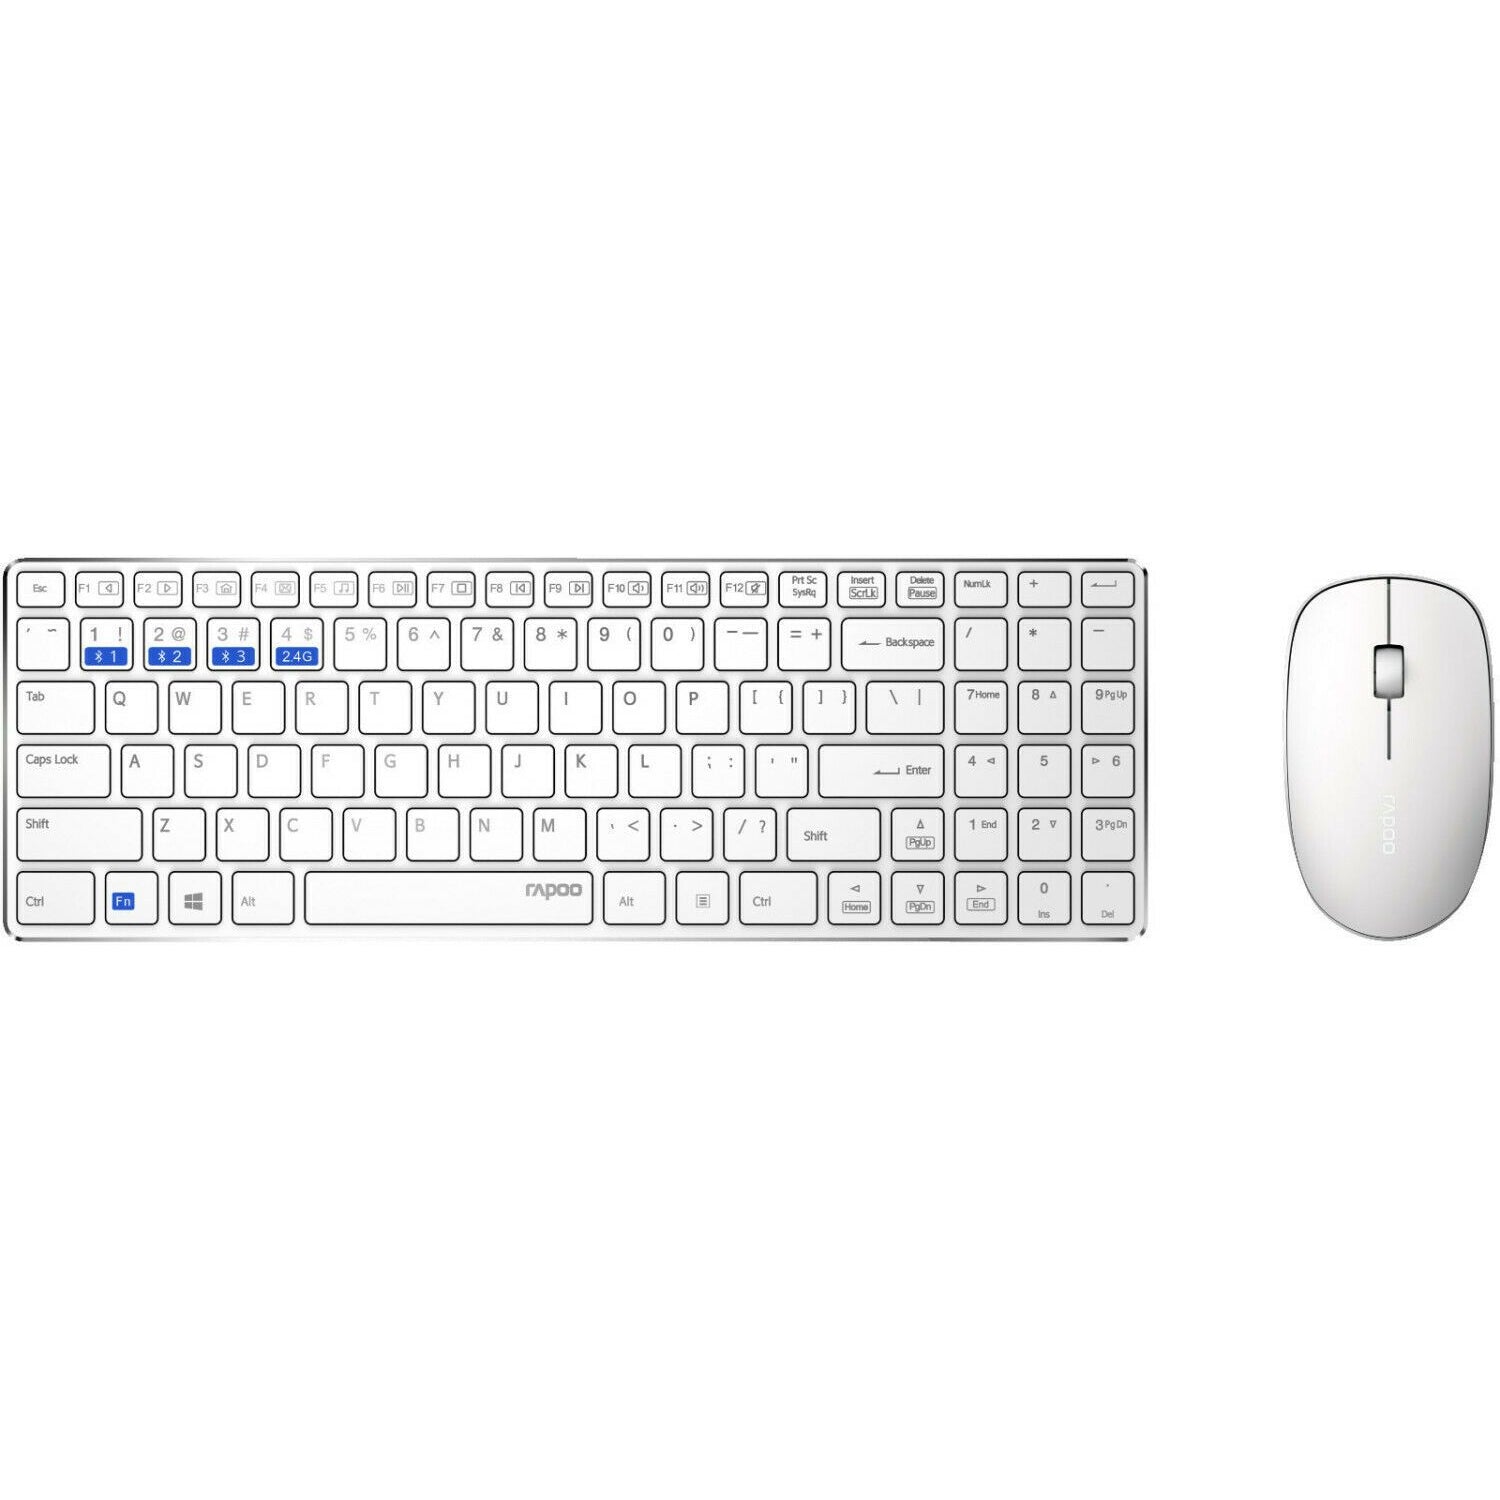 Rapoo 9300M Wireless Keyboard & Mouse Set, White - Refurbished Excellent